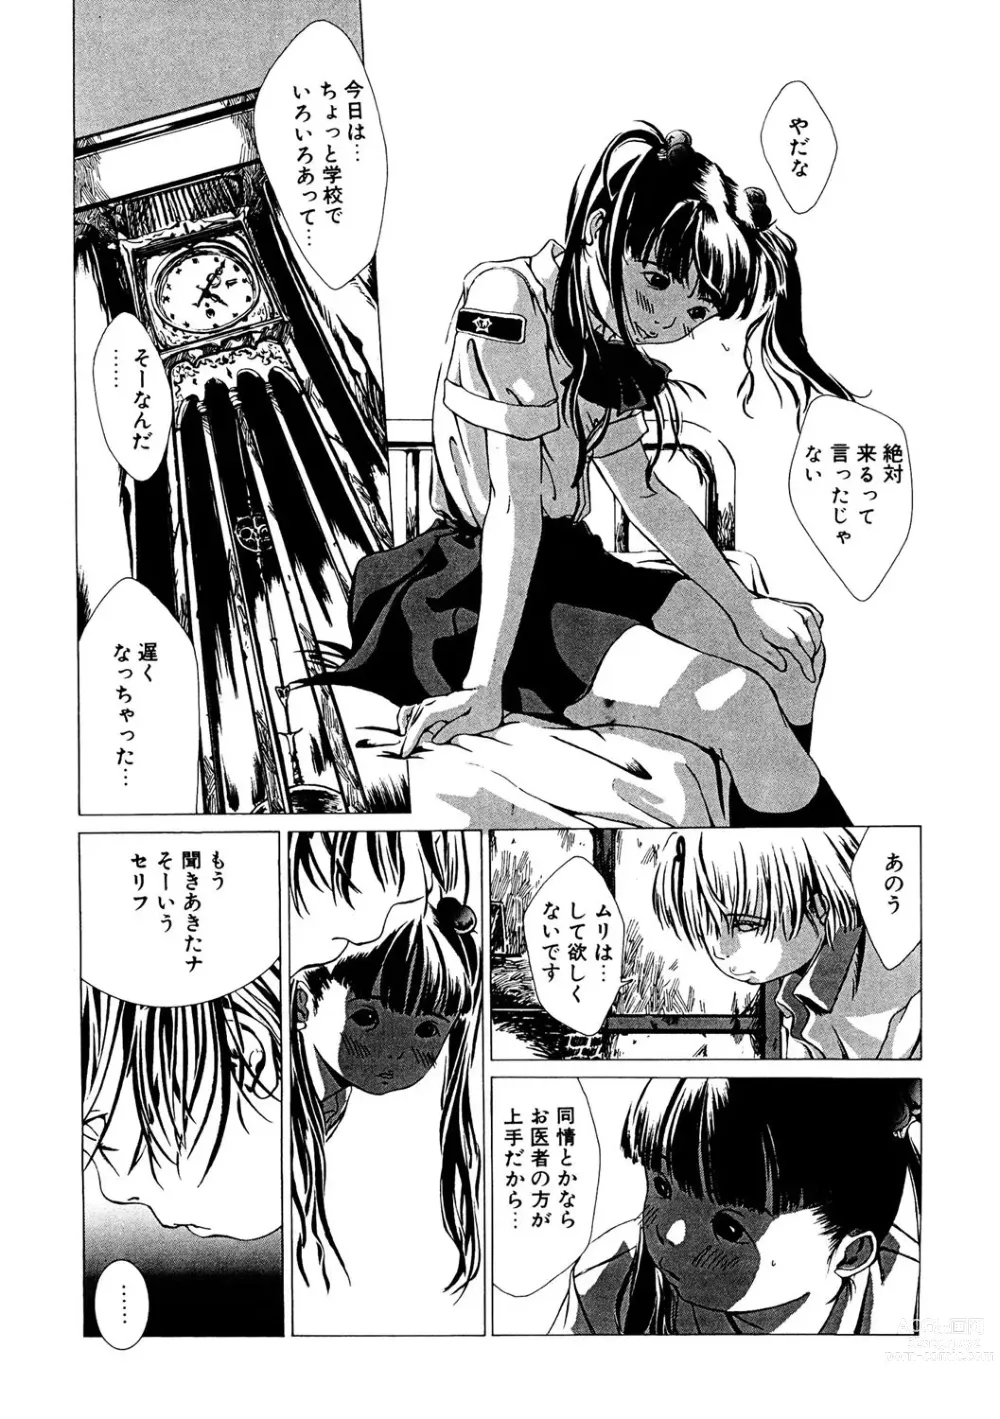 Page 162 of manga LQ -Little Queen- Vol. 53